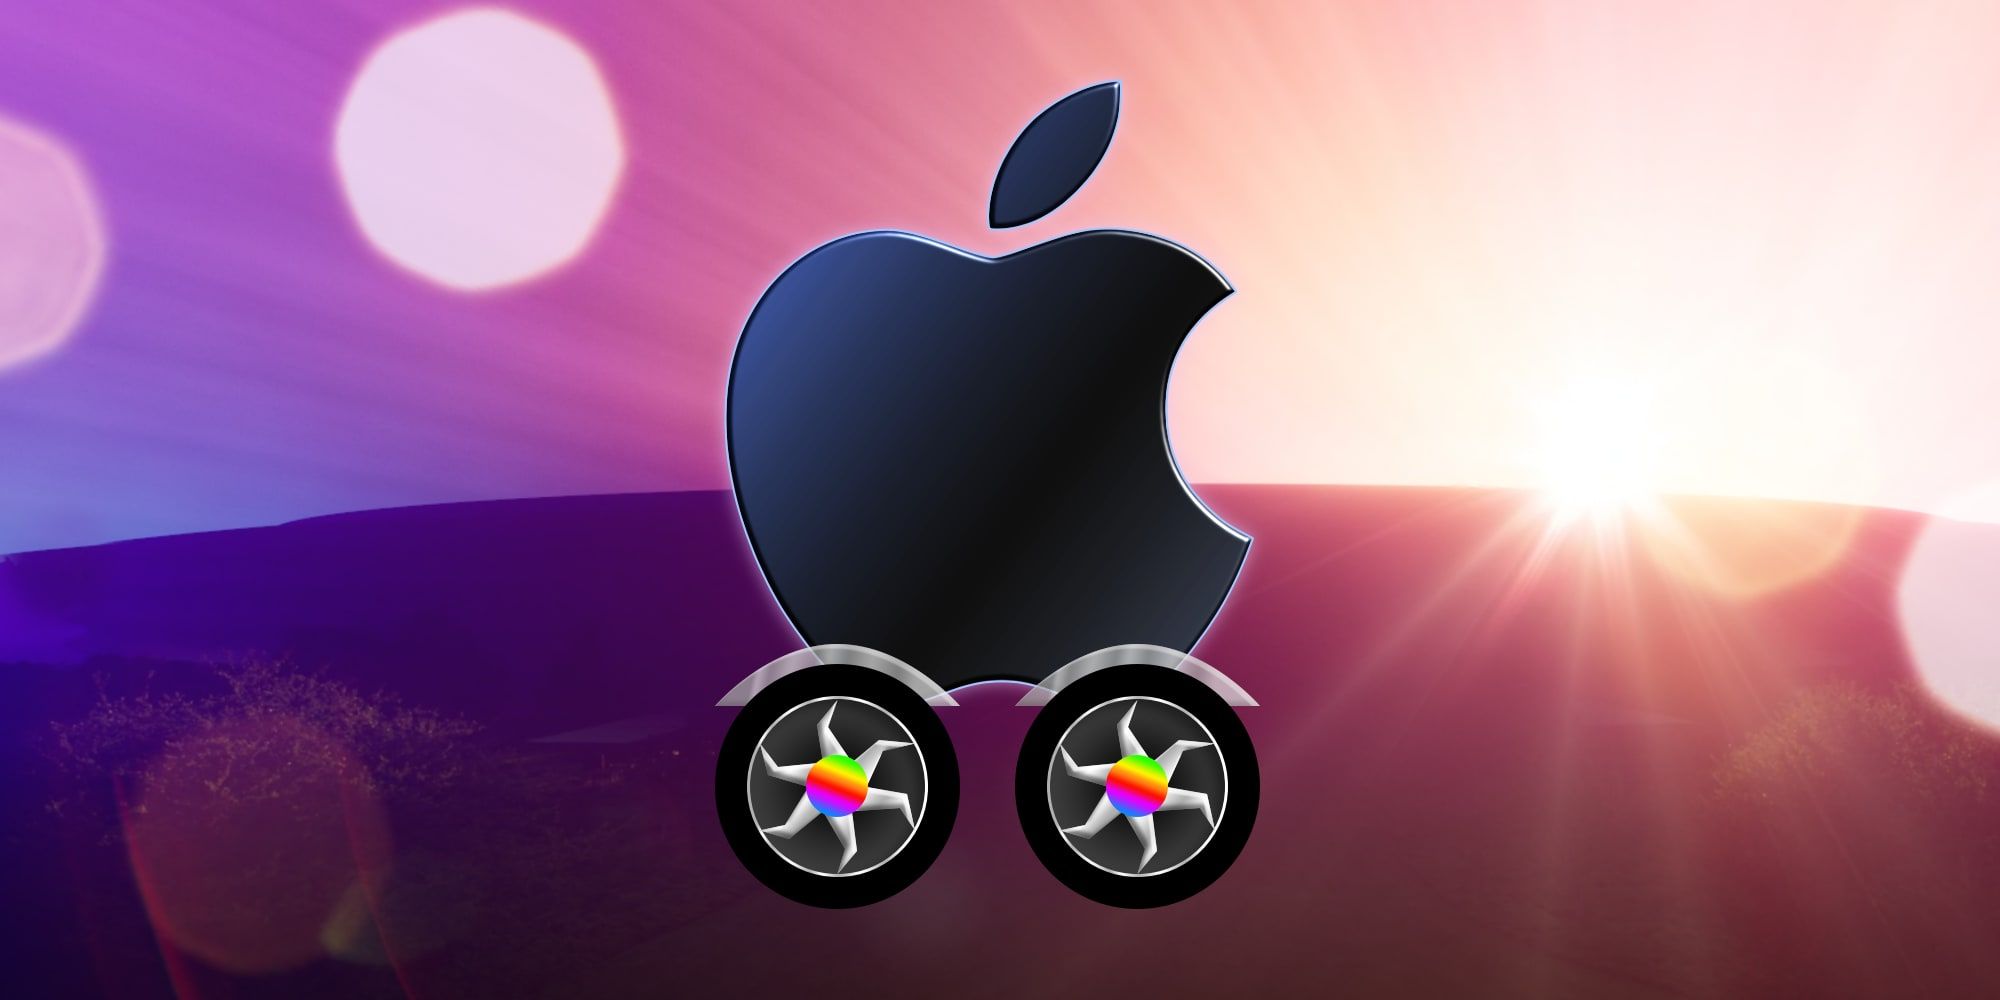 Apple Car Is Apple Building One & When Will It Release